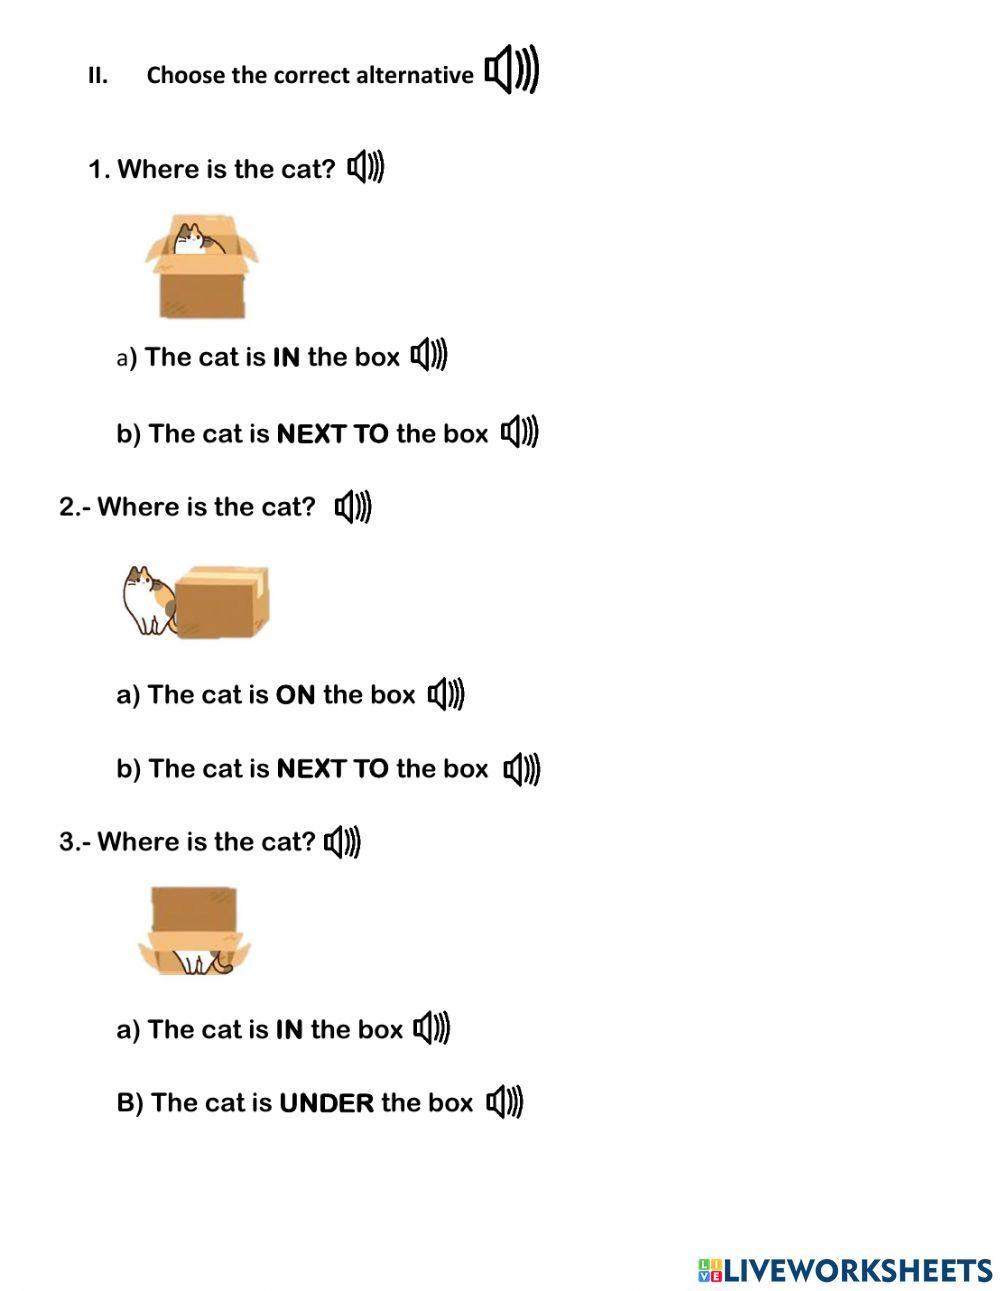 Prepositions (In-On-Under-Next to)